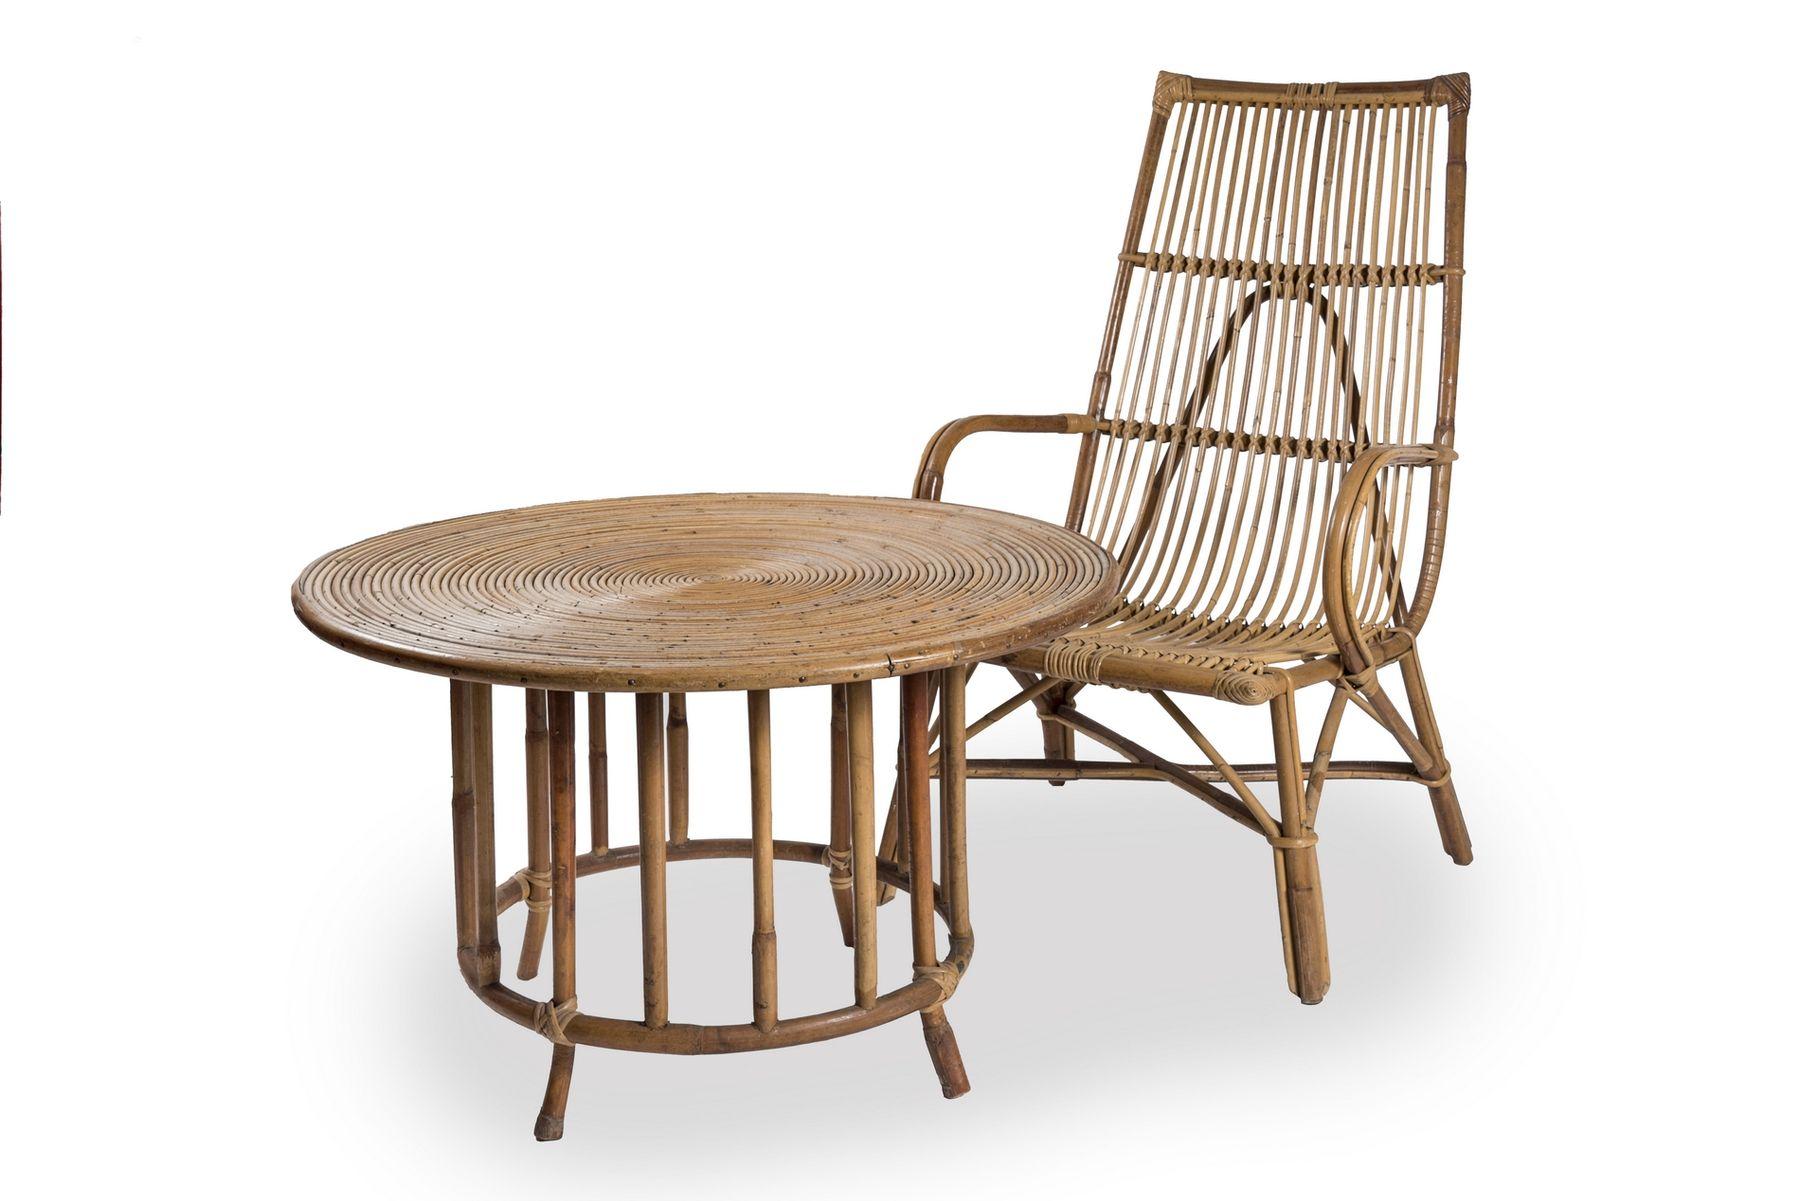 Set of vintage rattan and bamboo furniture comprising three armchairs and a round table, from the 1960s

Comfortable vintage set of furniture consisting of three armchairs with low, wide and high backrests, and a round coffee table with a tabletop